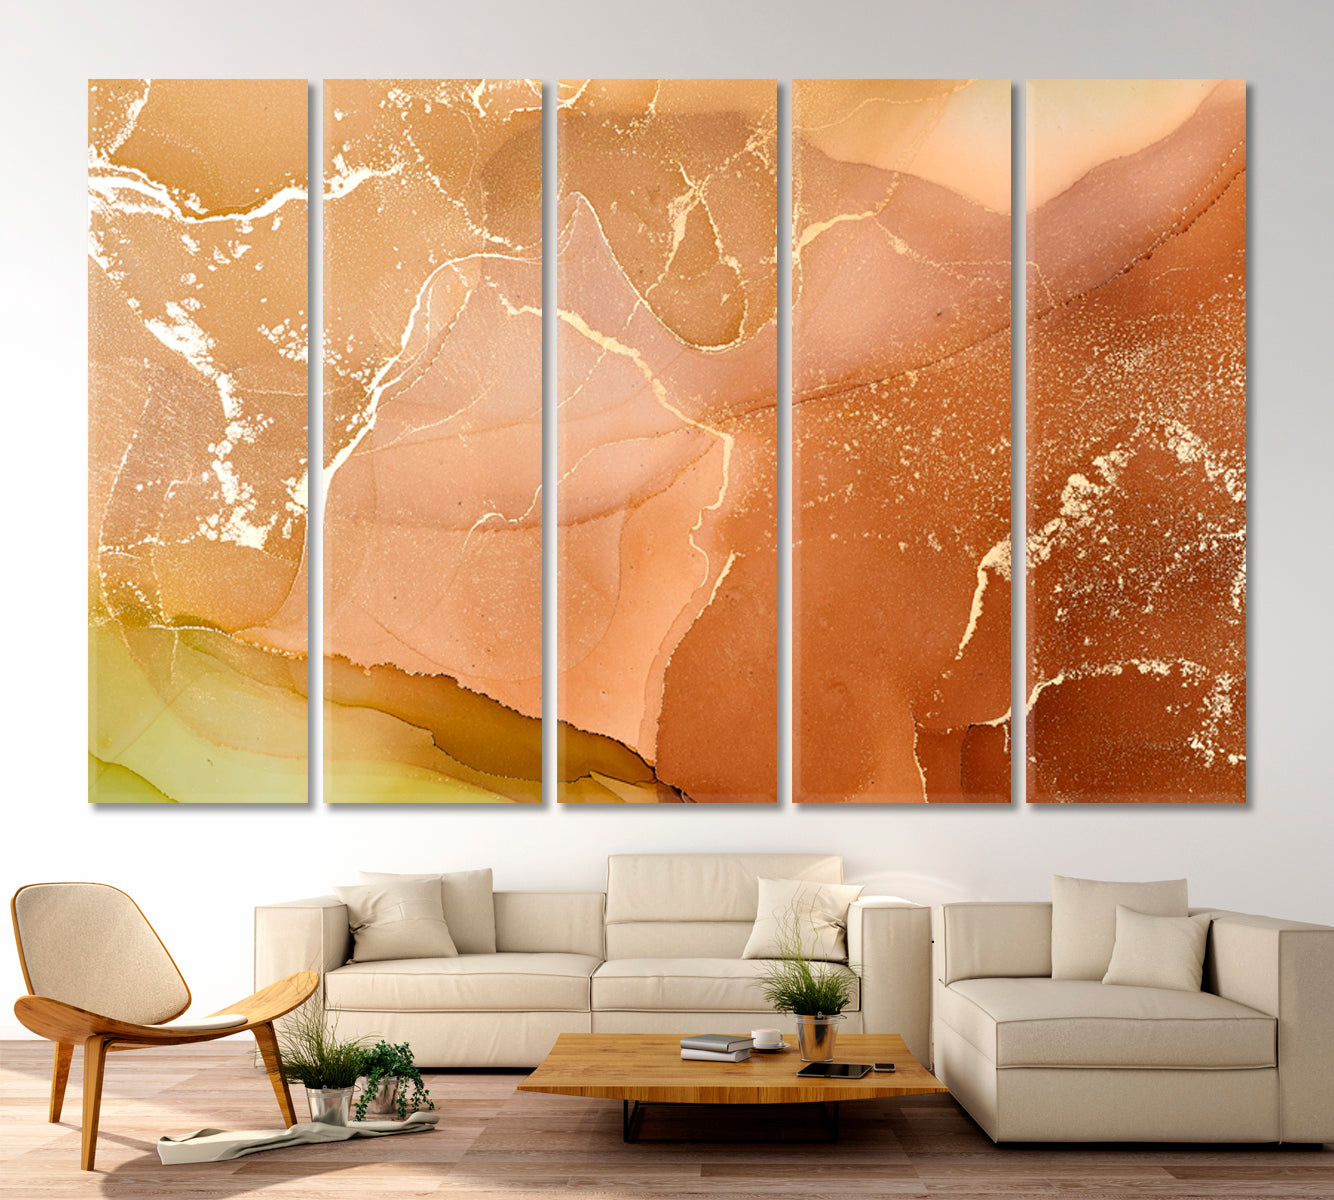 Abstract Marbled Ink Colors Fluid Stains Fluid Art, Oriental Marbling Canvas Print Artesty 5 panels 36" x 24" 